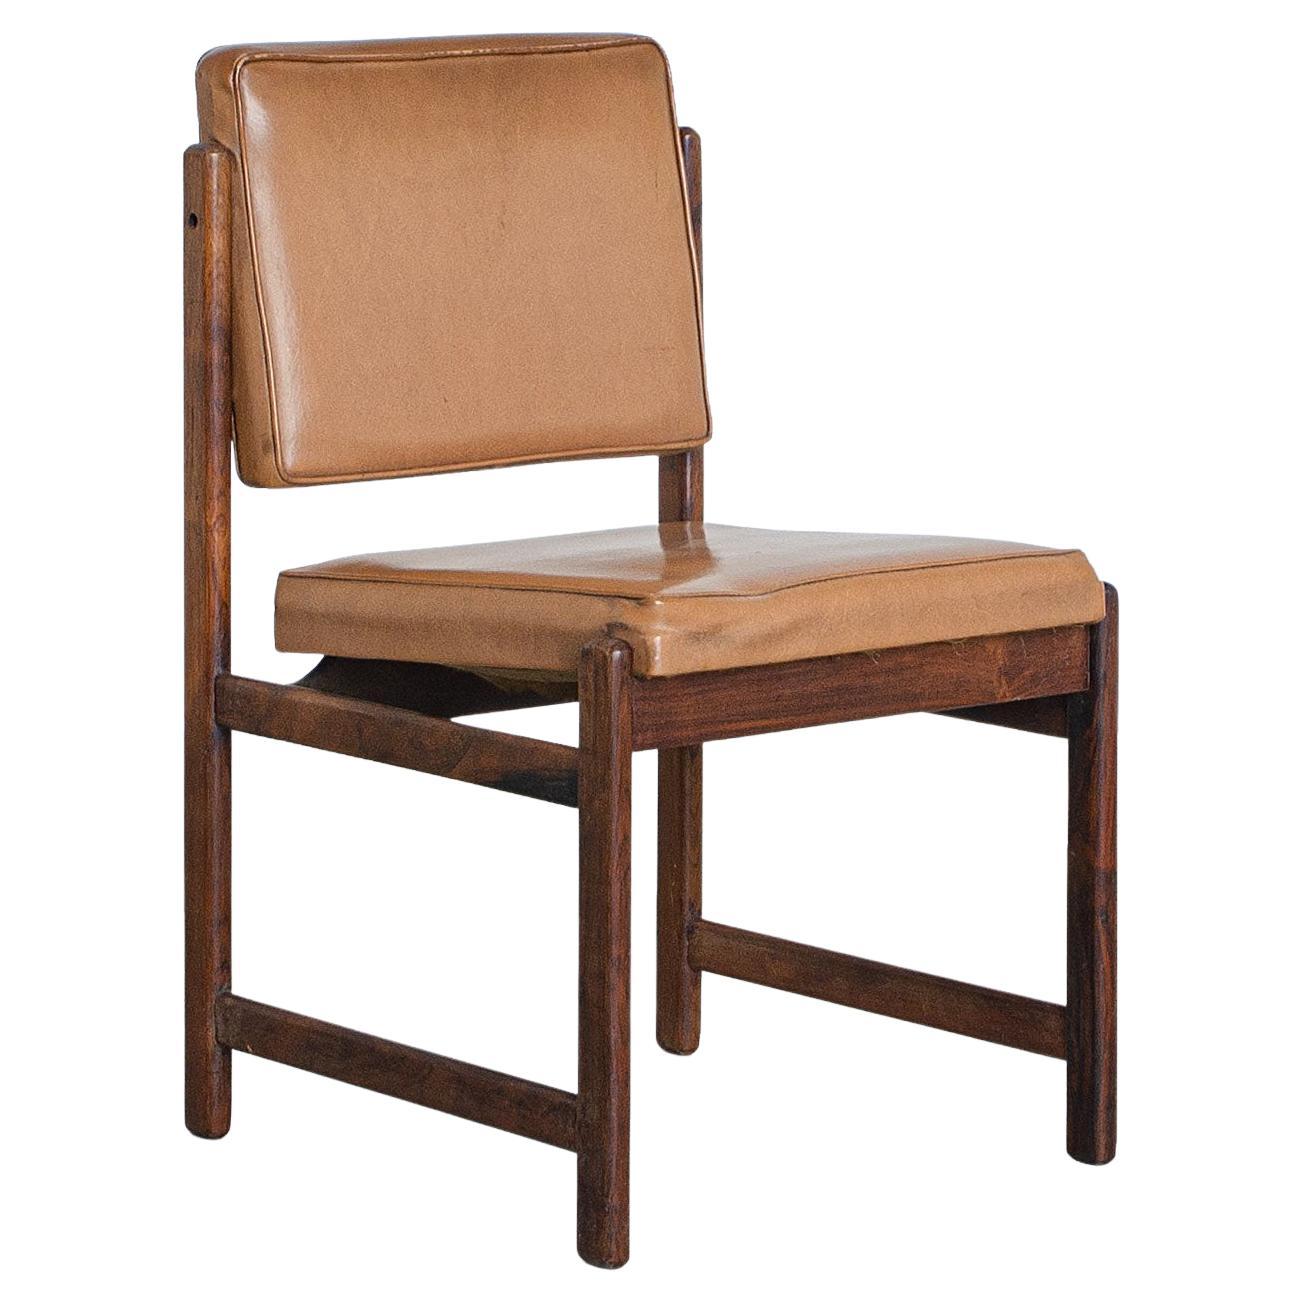 Set of 6 "Marco" Chairs, by Sergio Rodrigues, 1960, Brazilian Hardwood